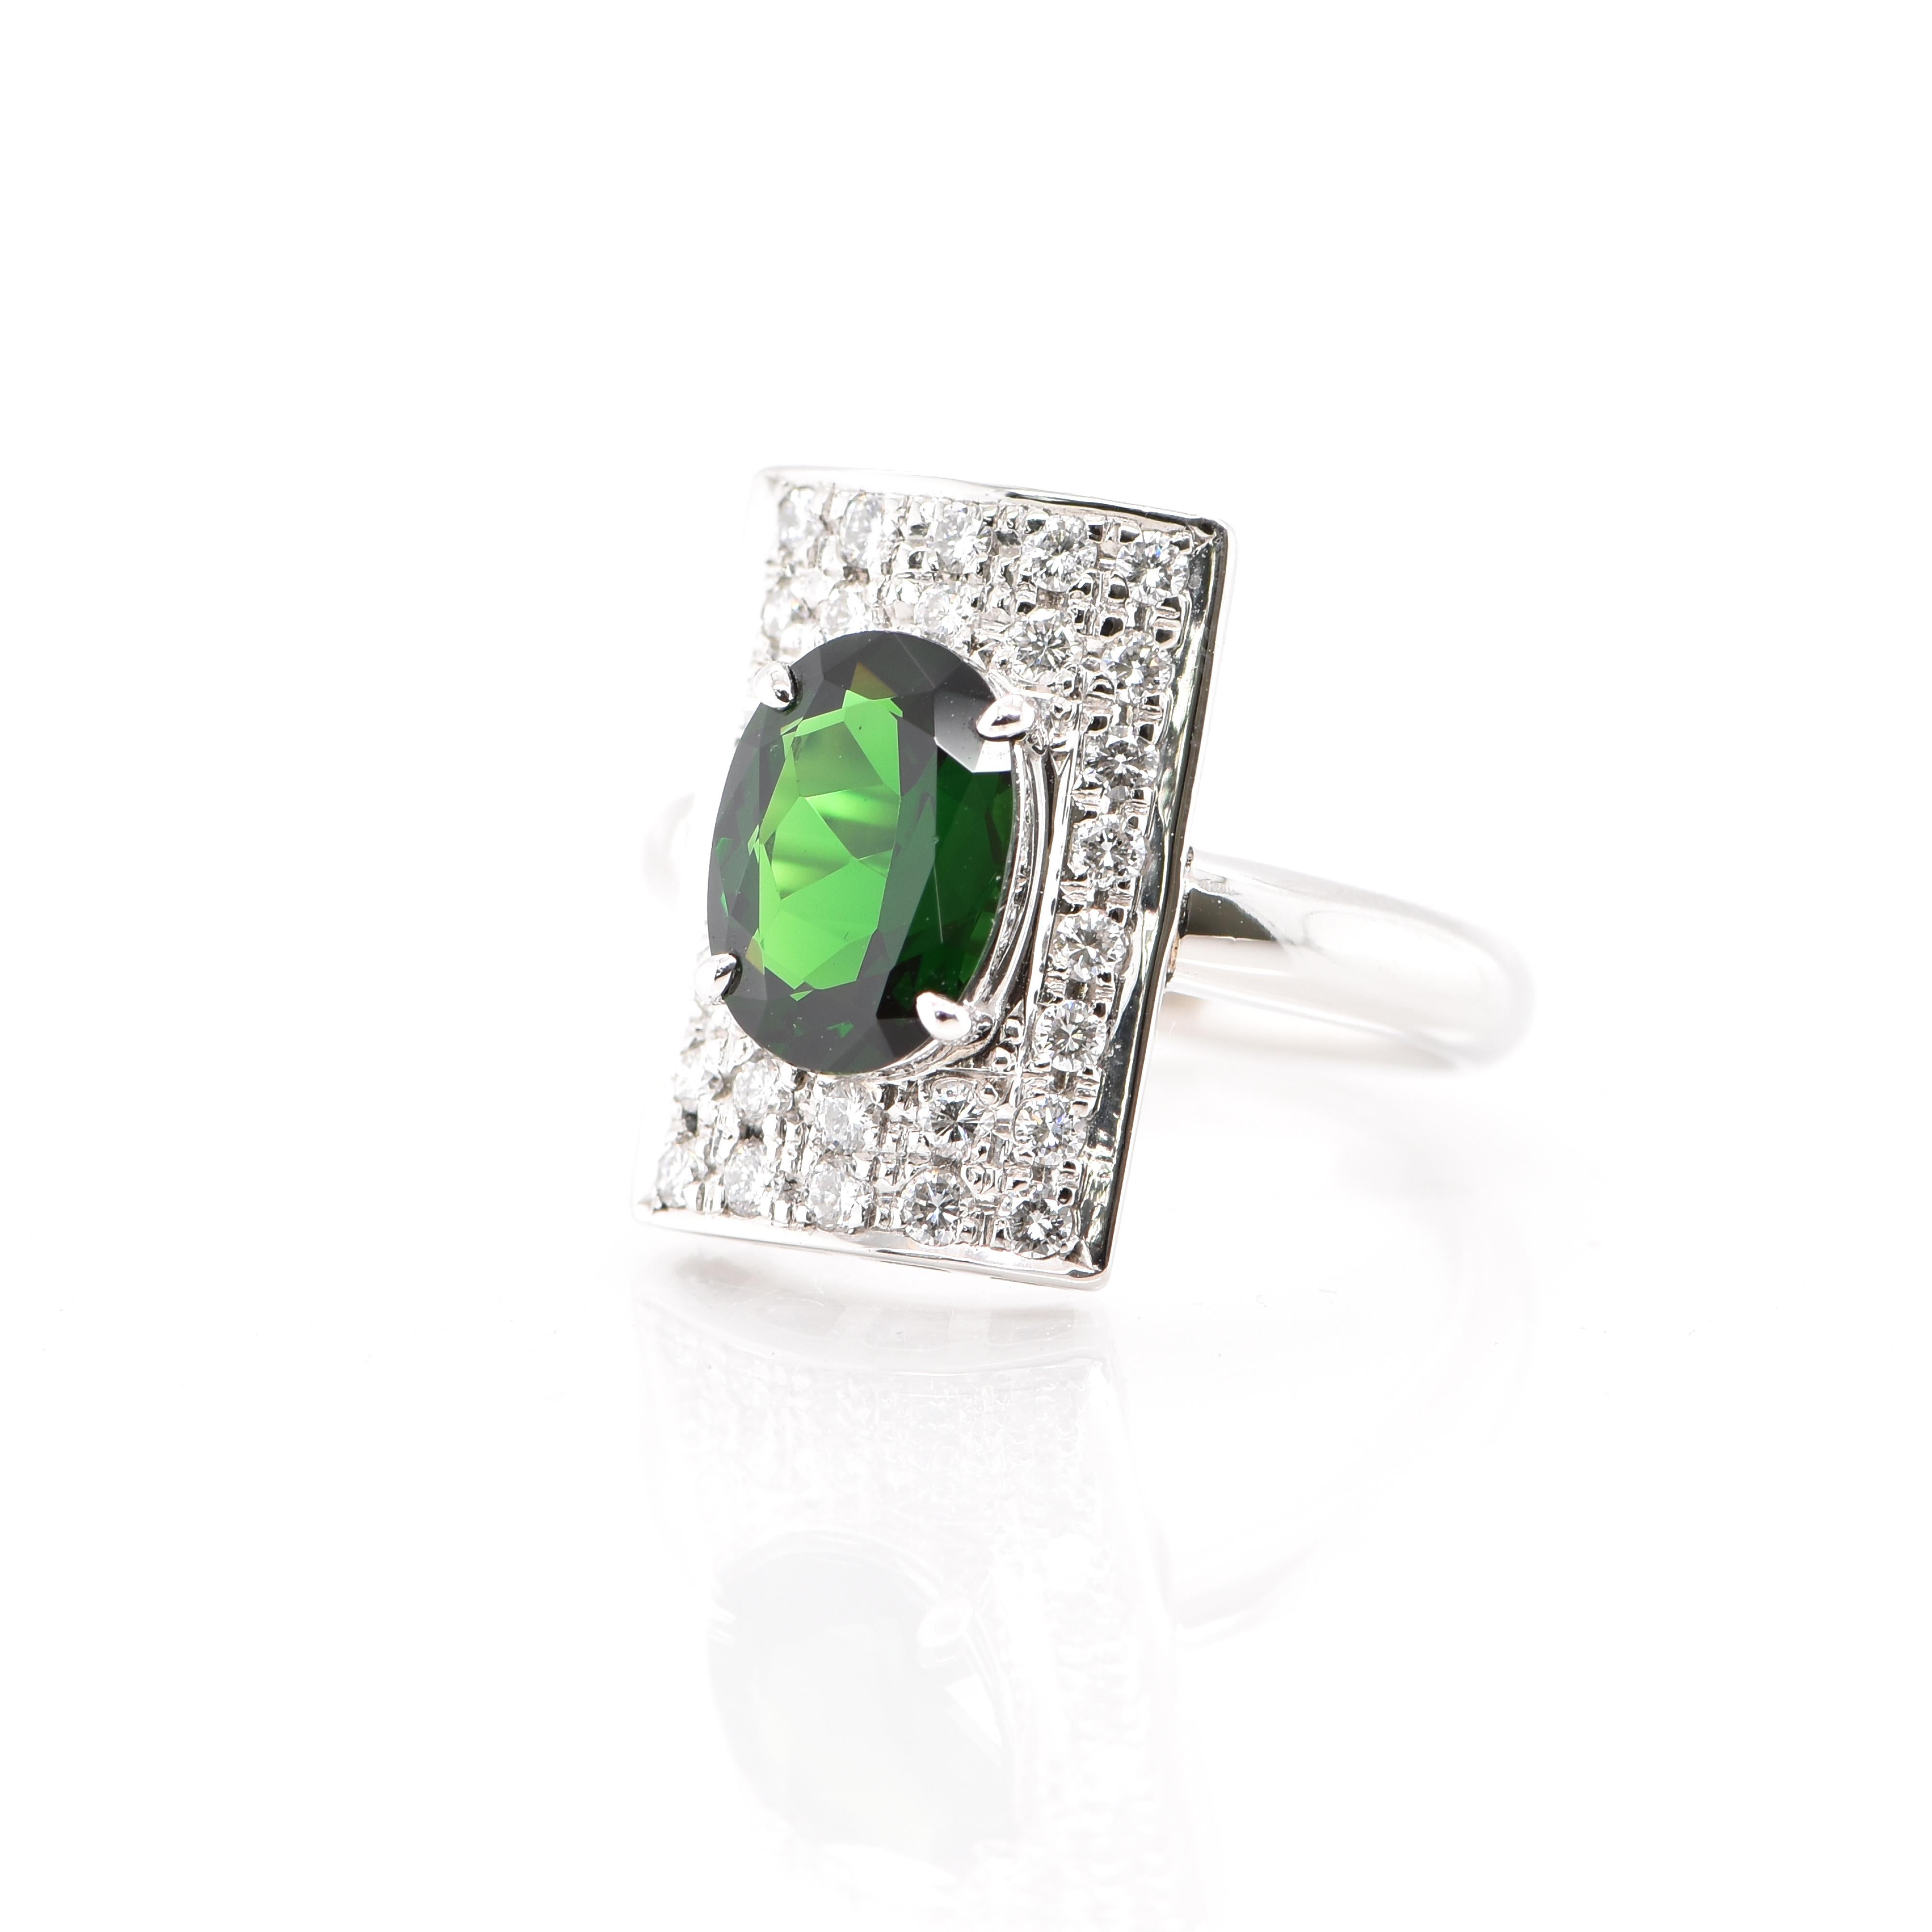 An absolutely gorgeous Art Deco Style Cocktail Ring featuring a 2.45 Carat Tsavorite Garnet and 0.55 Carats of Diamond Accents set in Platinum. Garnets have been adorned by humans throughout history from Ancient Egypt, Rome and Greece. They come in